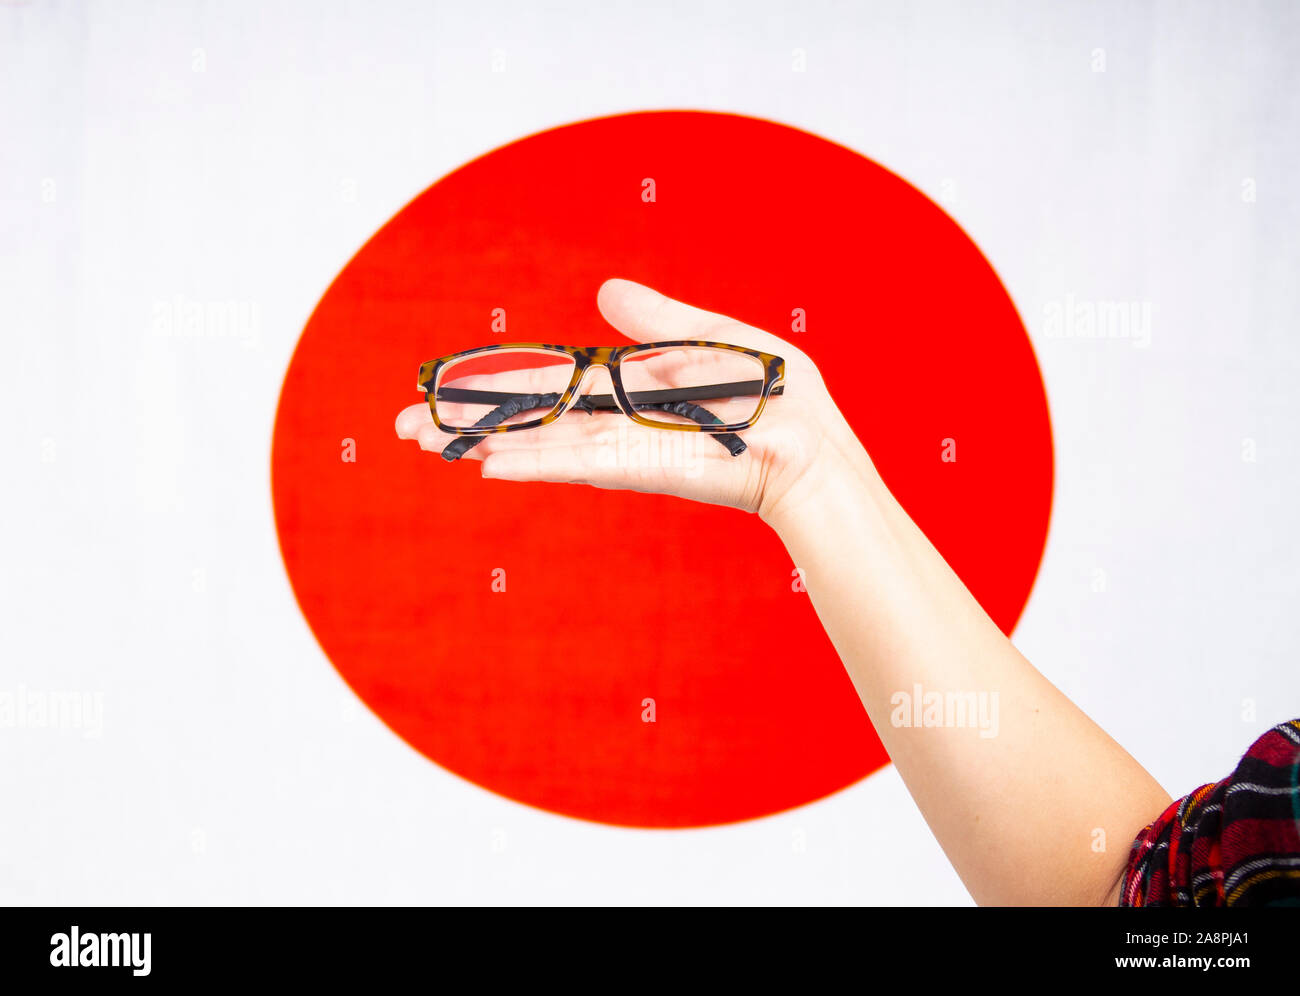 Female hand holding a pair of glasses with a japan flag Stock Photo